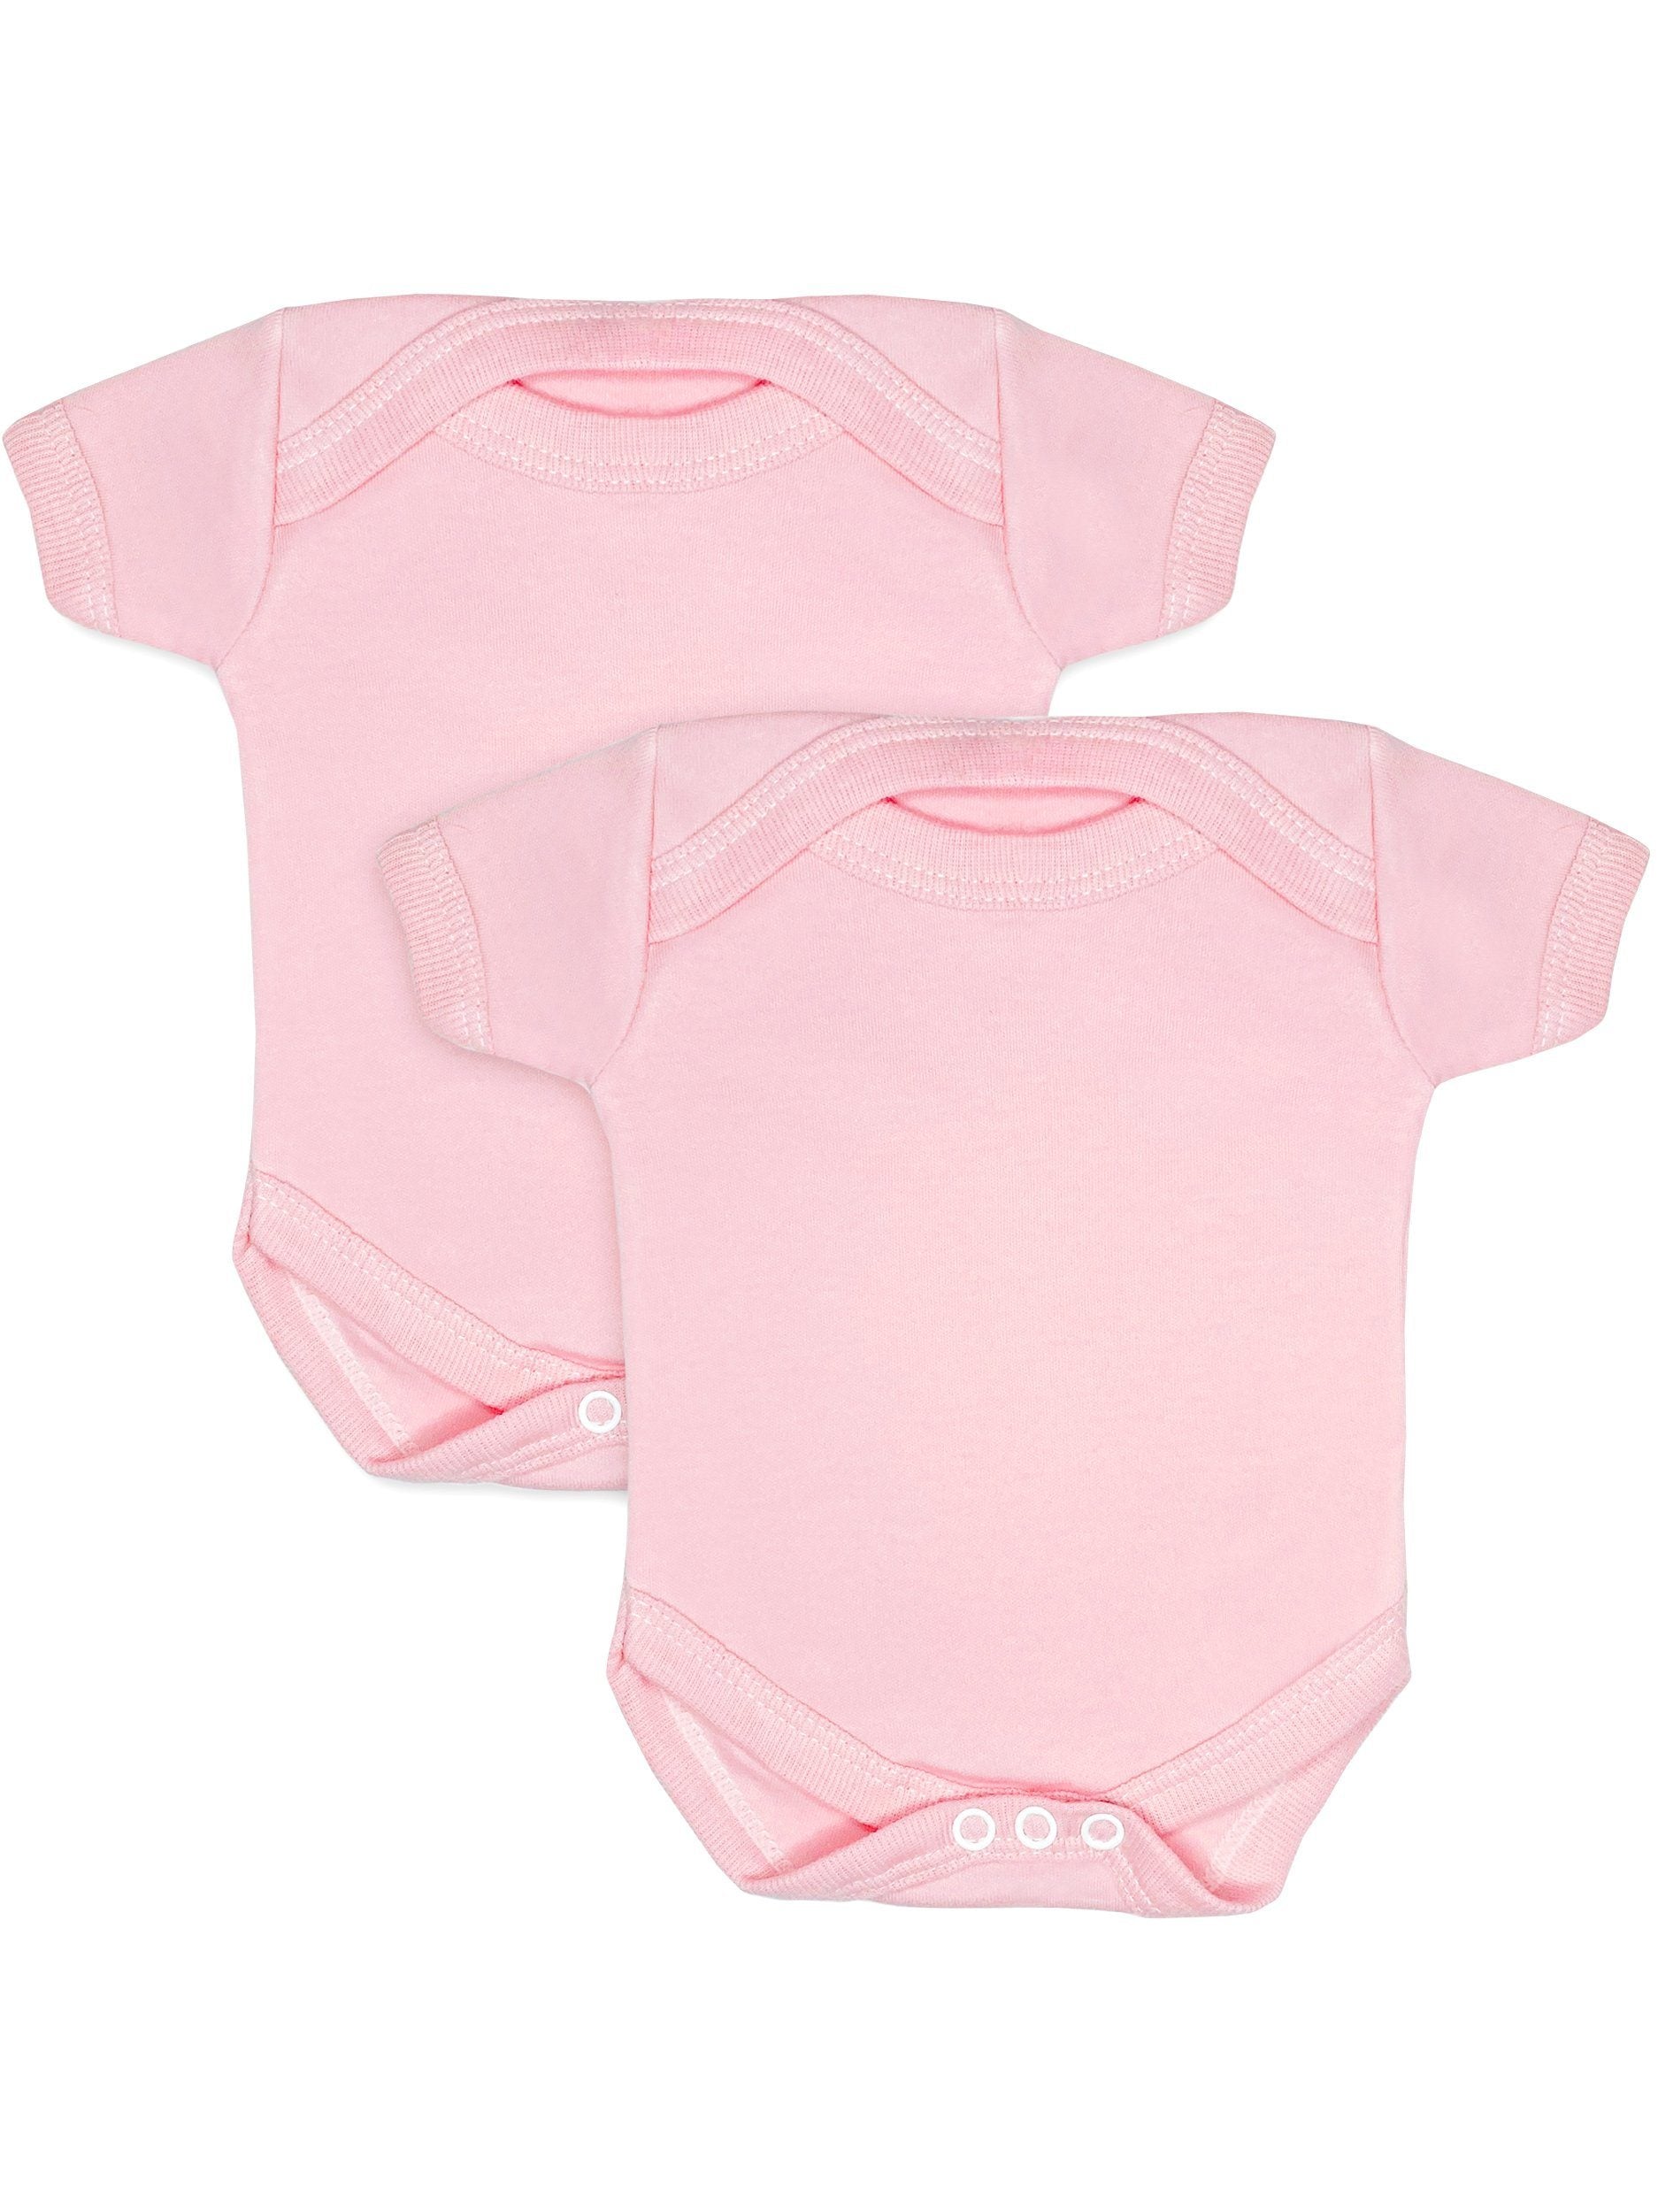 2 Pack - 100% Cotton Pink Short Sleeved Bodysuits Set/Multipack Little Mouse Baby Clothing & Gifts 